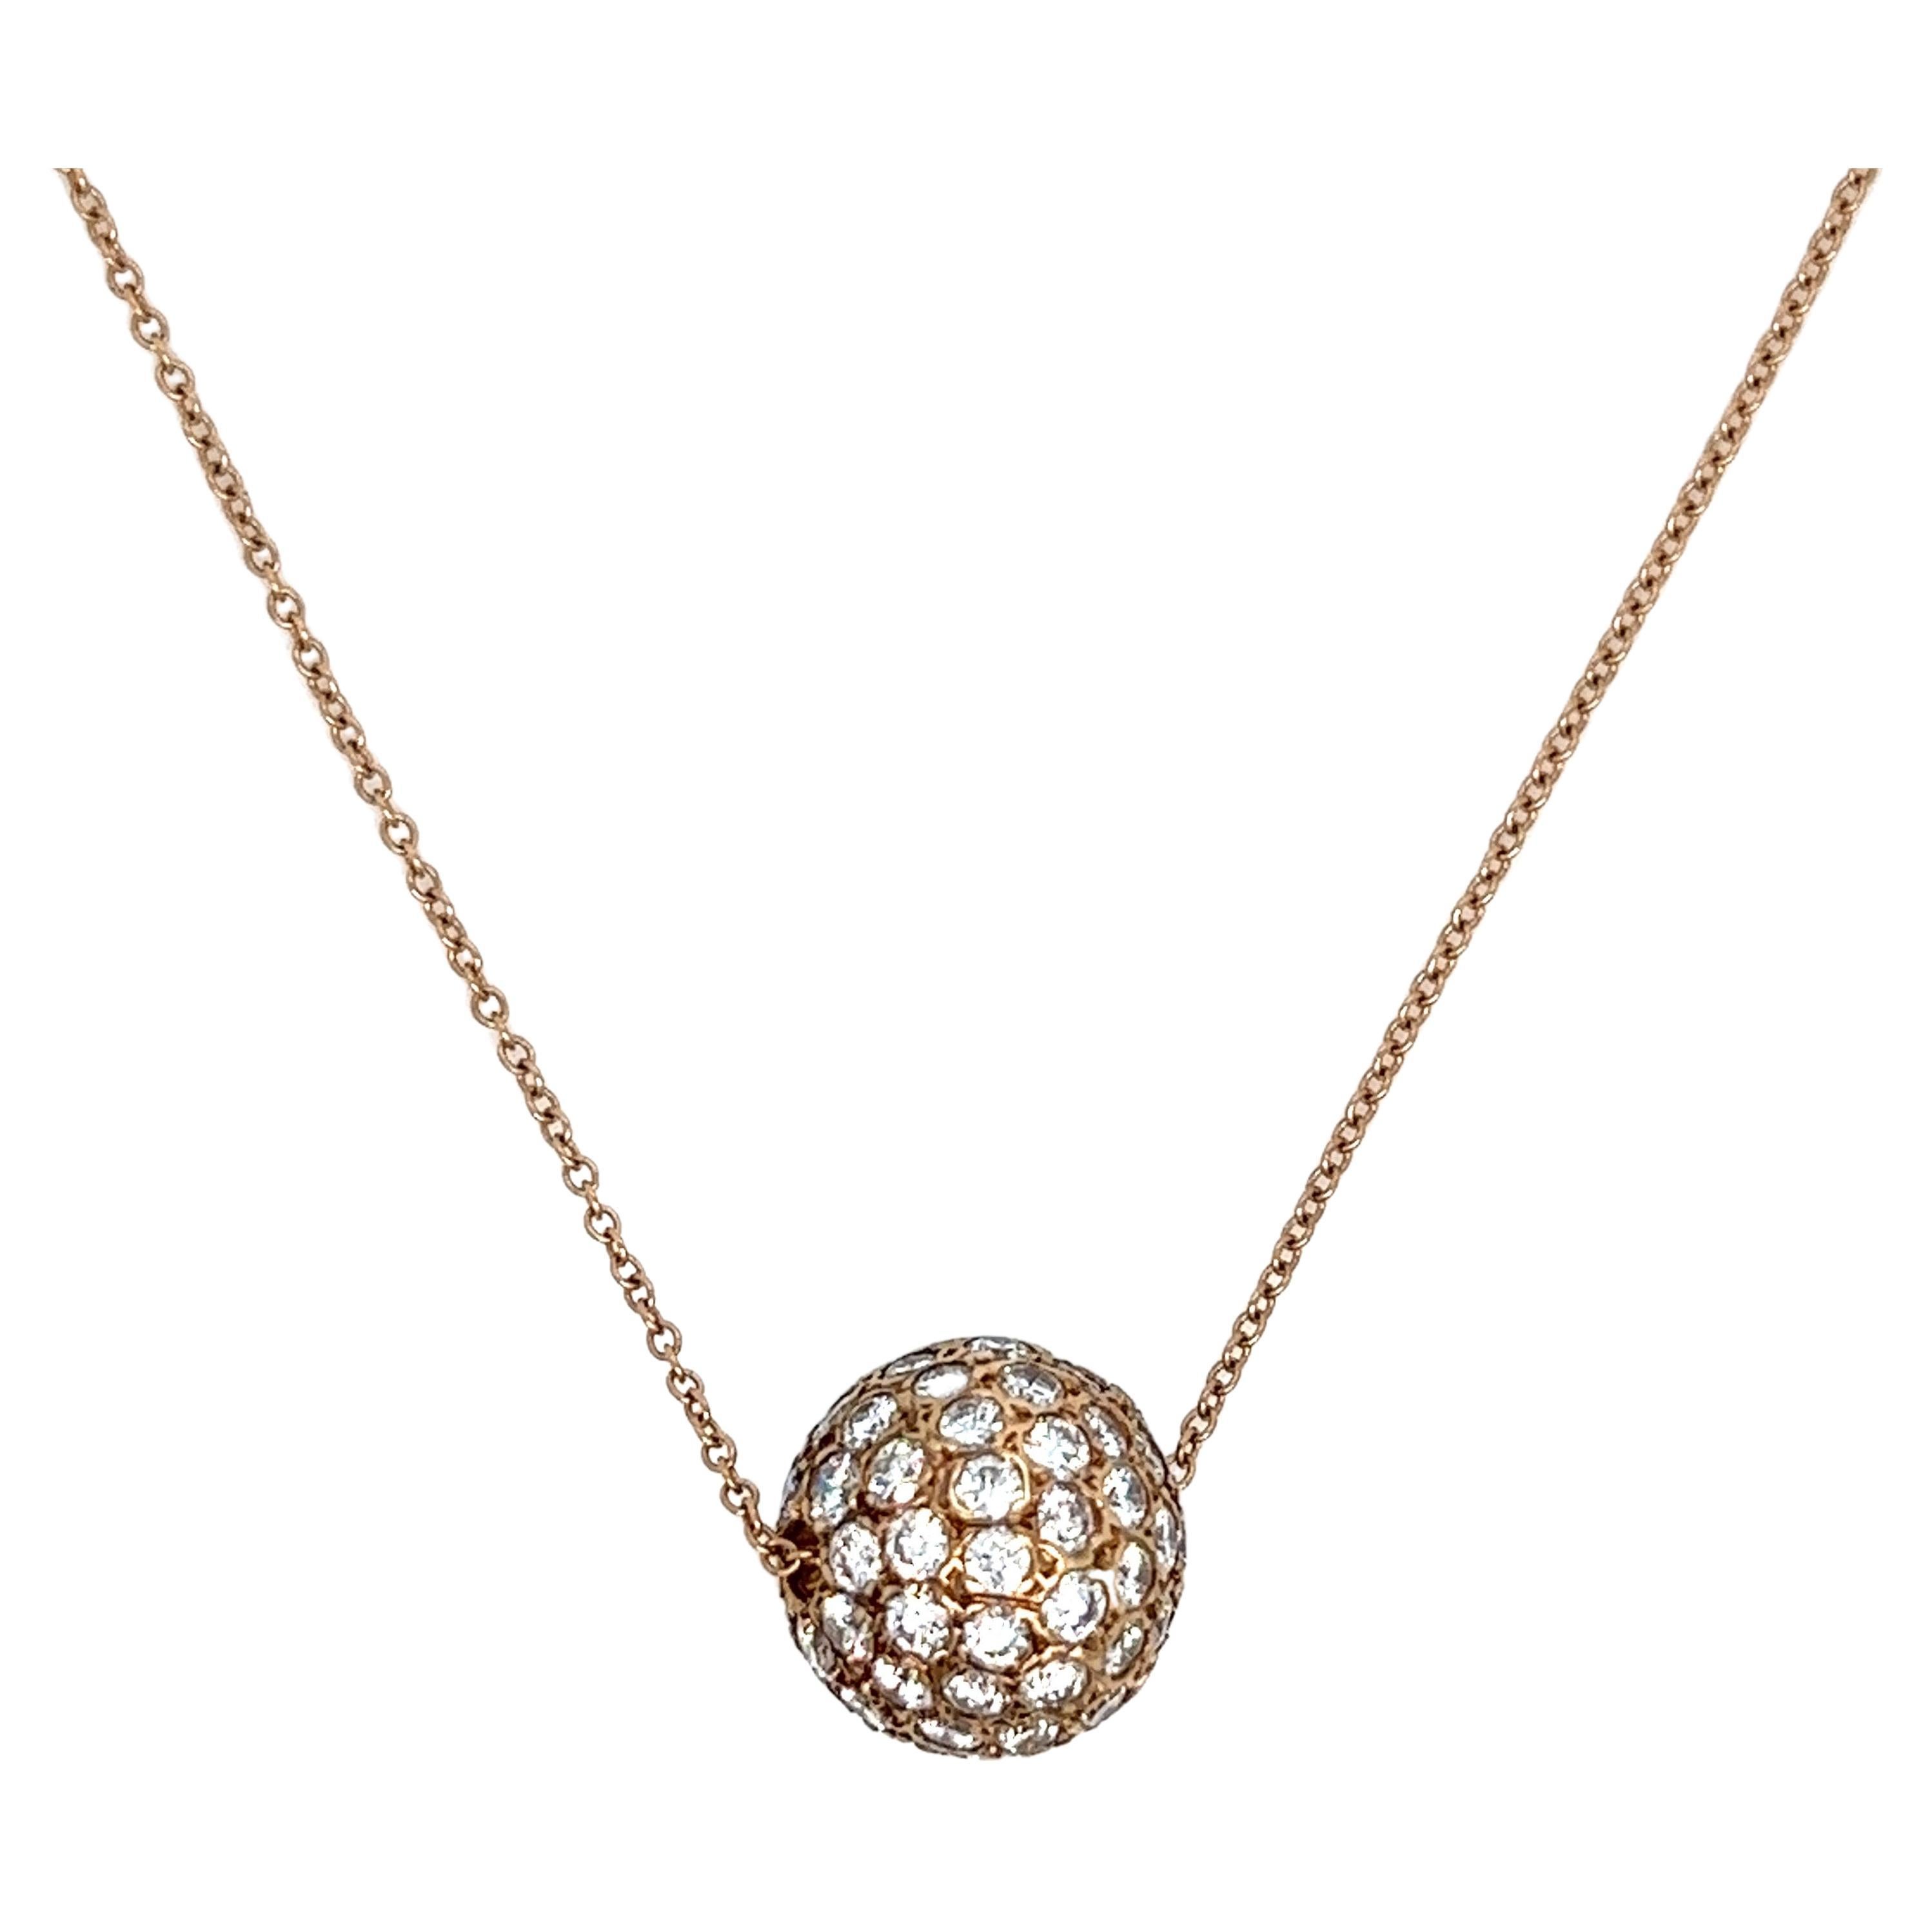 9ct Gold Engravable Round Pendant On Chain 16 20 Inches Chain - Beautiful Bespoke & Affordable Jewellery - Environmentally Conscious